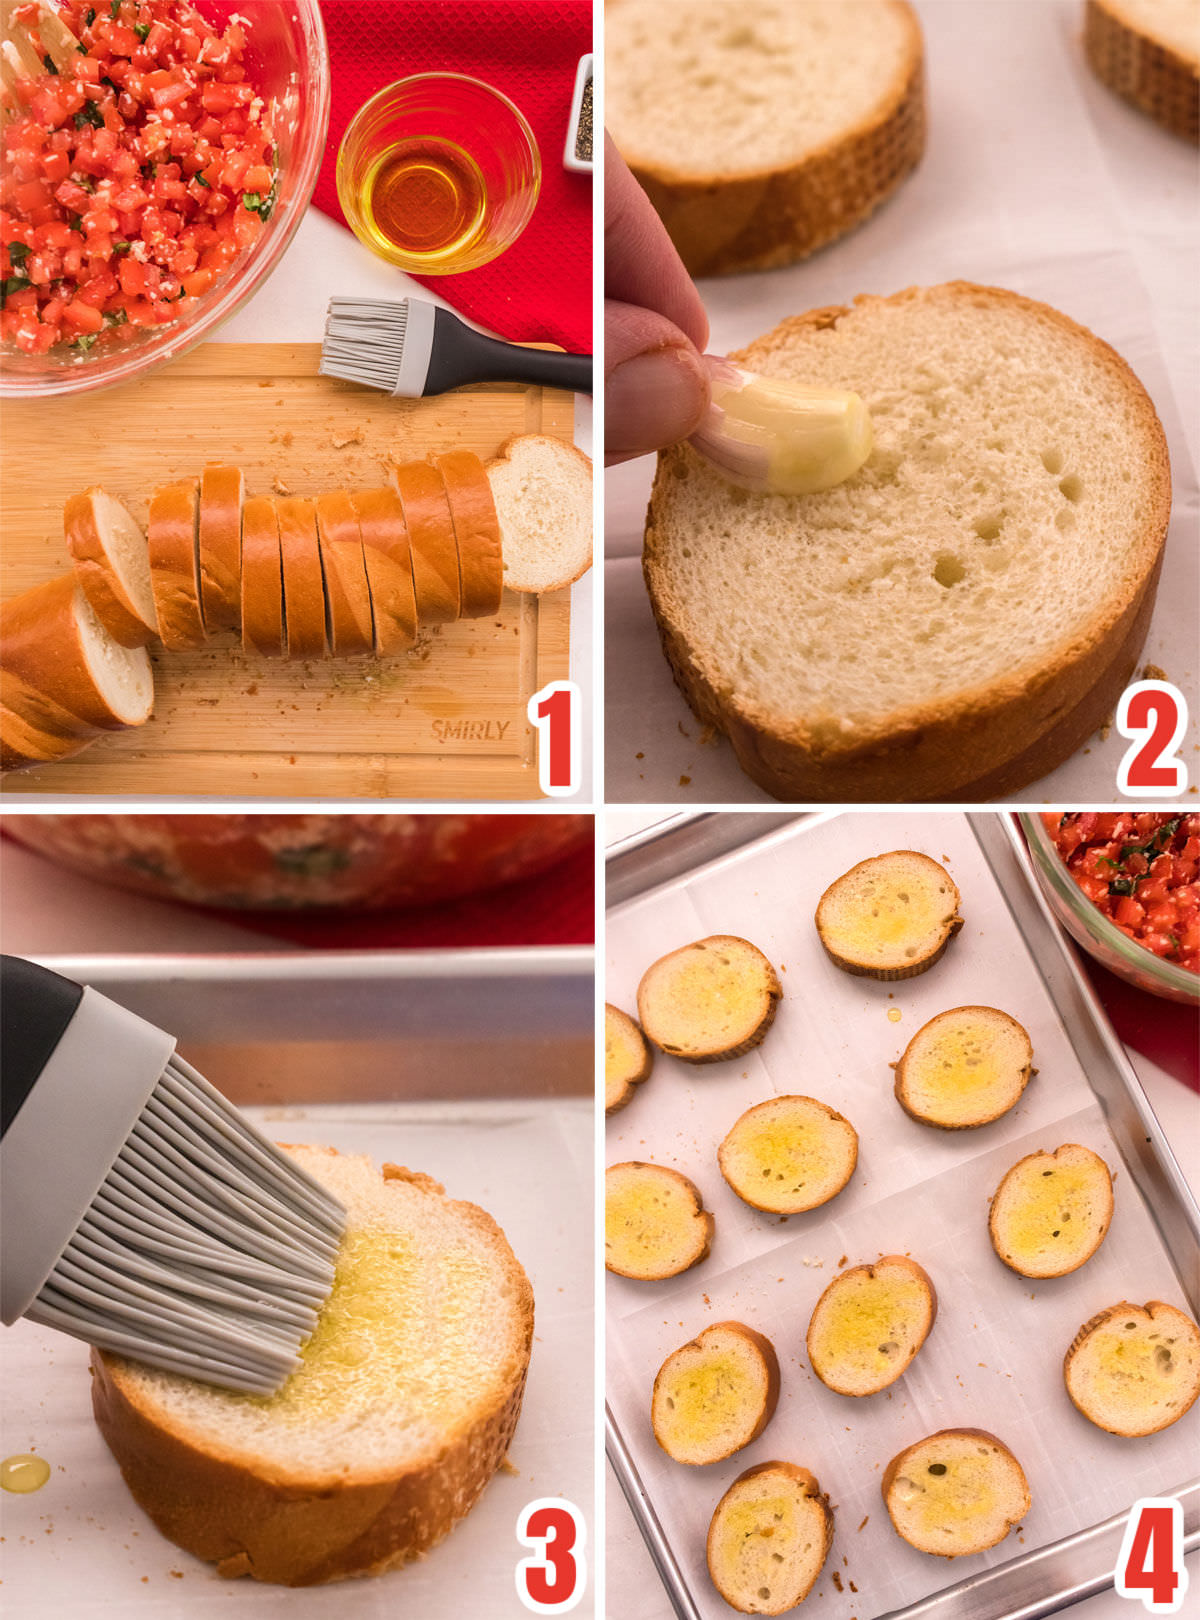 Collage image showing all the steps for making the French Bread toast to serve the Italian Bruschetta on.